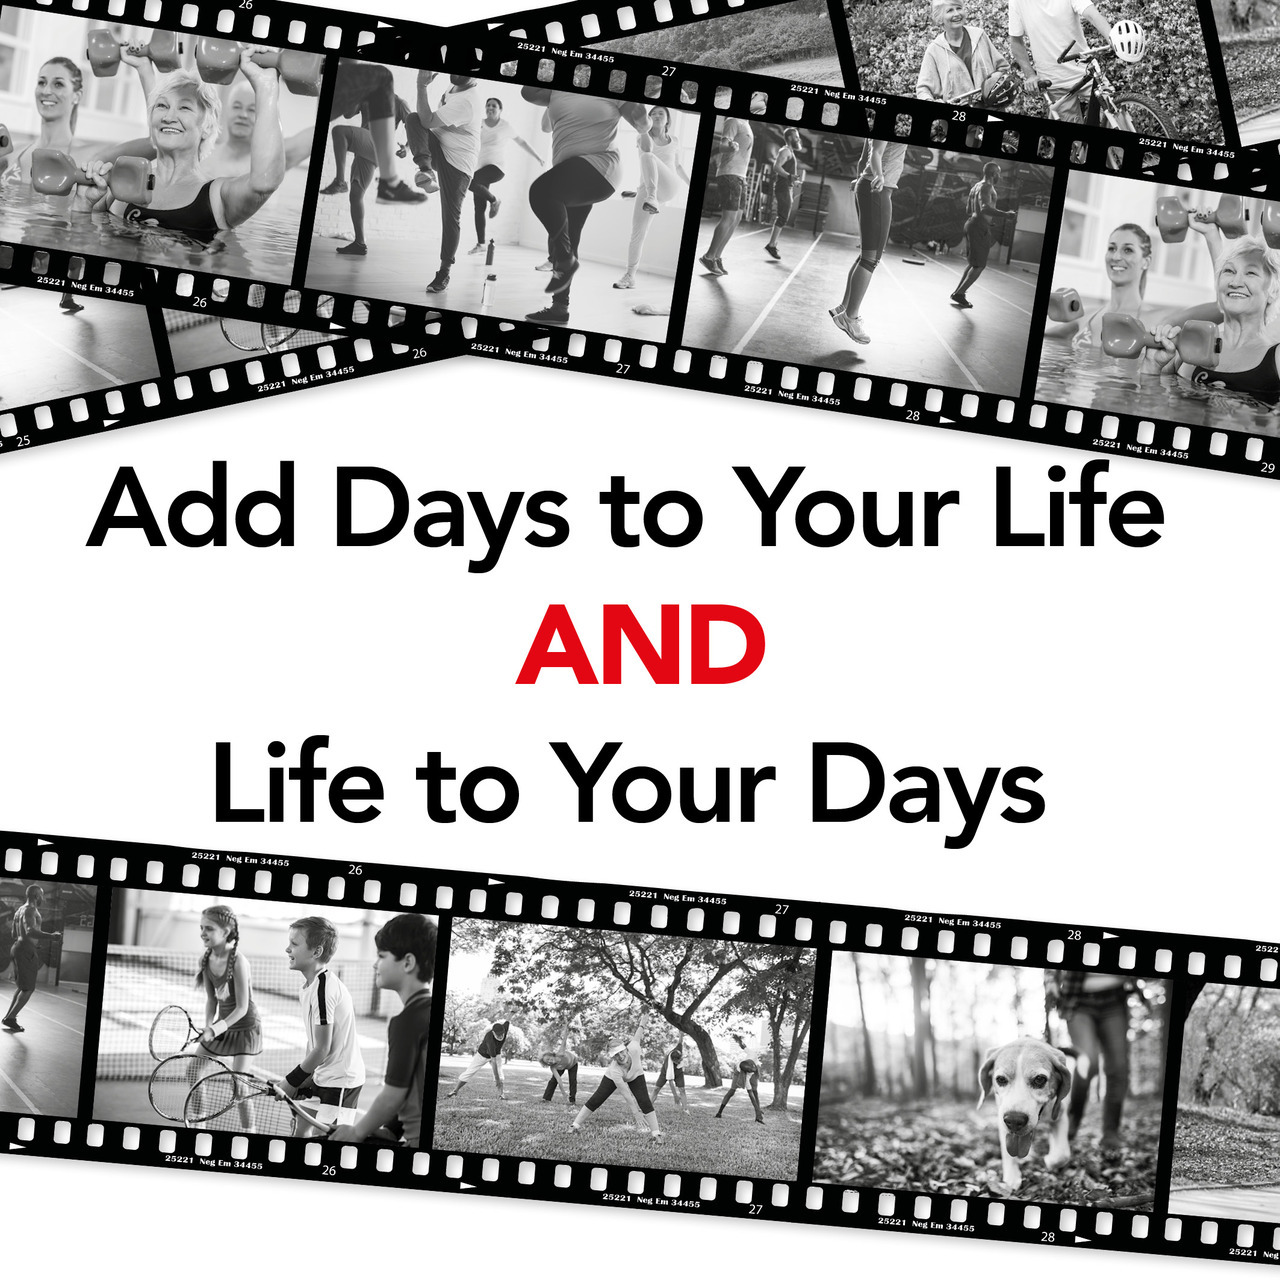 <p><b>Add Days to
Your Life AND Life to Your Days</b></p><p>Numerous
people are living much longer and life expectancy is now at its all-time high,
the fact that so many people are living longer, well into their eighties and nineties
is a wonderful ideal. However, the sad reality is that living longer doesn’t
always include a good quality of life, it’s not a package deal. </p><p>Many
people end up feeling like they’ve become a financial, physical and emotional
burden on their families as they outlive their children and their pensions.
Losing independence and  swallowing
handfuls of pills every day, and requiring nursing care is not the way most
people would choose to spend their last years. </p><p>There
are steps you can take to reduce the risk of this outcome. Making a conscious
decision to take small steps (literally) from today, could make all the
difference in your life going forward. </p><p> Exercise or physical activity (PA) when
performed regularly, has been proven to prevent and help manage more than 20
chronic conditions. These include coronary heart disease, stroke, type 2
diabetes, cancer, obesity, mental health problems and musculoskeletal
conditions. Sadly, you can’t bank the benefits of exercise from your youth.
Ideally being active throughout your lifespan would give optimal health
benefits, however research has shown the health gains achieved through PA can
be attained at any time. So, it doesn’t matter when you start as long as you
start! </p><p>.Physical activity includes all forms of exercise, such
as everyday walking or cycling to get from A to B, active play, work-related
activity and active recreation; such as working out in a gym, dancing,
gardening or playing active games, as well as organised and competitive sport.
You don’t have to  sign up for an IronMan
Ultra-Triathlon or become the next Crossfit Superhuman</p><p>Physical
inactivity is the fourth leading risk factor for death. The latest research
shows that a sedentary life is as great a risk factor as smoking and obesity,
for heart disease risk. Sedentary behaviour is not simply a lack of activity
but a cluster of individual behaviours where sitting or lying is the dominant
mode of posture, and energy expenditure is very low. </p><p>Inactivity
was always associated as a cause of being overweight or obese, which in turn
results in an increased risk of heart disease and diabetes. However, the most
current research has shown that even normal weight individuals that are
inactive, are at risk of developing disease. </p><p>While
you can blame it on your job or school that forces you to sit for hours in a
day, you can also mitigate the negative effects with just 60-75 minutes of
moderate intensity PA a day. </p><p>Regardless
of your activity starting point, there are benefits to be gained for anyone who
increases their activity levels. Individuals that follow the recommended
physical activity guidelines have shown to have optimal health benefits of a
39% reduced risk of dying from any disease. However, anything is better than
nothing – even doing half the amount of the recommended weekly activity has
shown a 20% lower risk of mortality.</p><p>Regular physical activity
roughly halves your chance of developing some cancers, like bowel and breast
cancer. Studies have shown that people who continued to exercise once diagnosed
with cancer had significantly less cancer deaths and any-cause death than those
who were inactive.</p><p>If you’d like to know more,
you can download our <b>Gold Standard
Physical Activity Recommendations leaflet</b>, along with additional exercise
advice for people suffering from the following conditions, all of which can
benefit significantly with regular physical activity.</p><p>1.      
Staying Healthy and Preventing
Disease</p><p>2.     
COPD</p><p>3.      
Depression</p><p>4.     
Musculoskeletal Pain</p><p>5.      
Type 2 Diabetes</p><p>6.     
Cancer</p><p>7.      
Dementia</p><p>8.     
Falls and Frailty</p><p>9.     
Inflammatory Arthritis and
Osteoarthritis</p><p>10.  
Heart Disease</p><p>You can download all the
leaflets at the following link .<a href="http://bit.ly/2S3pgnW">http://bit.ly/2S3pgnW</a> </p>